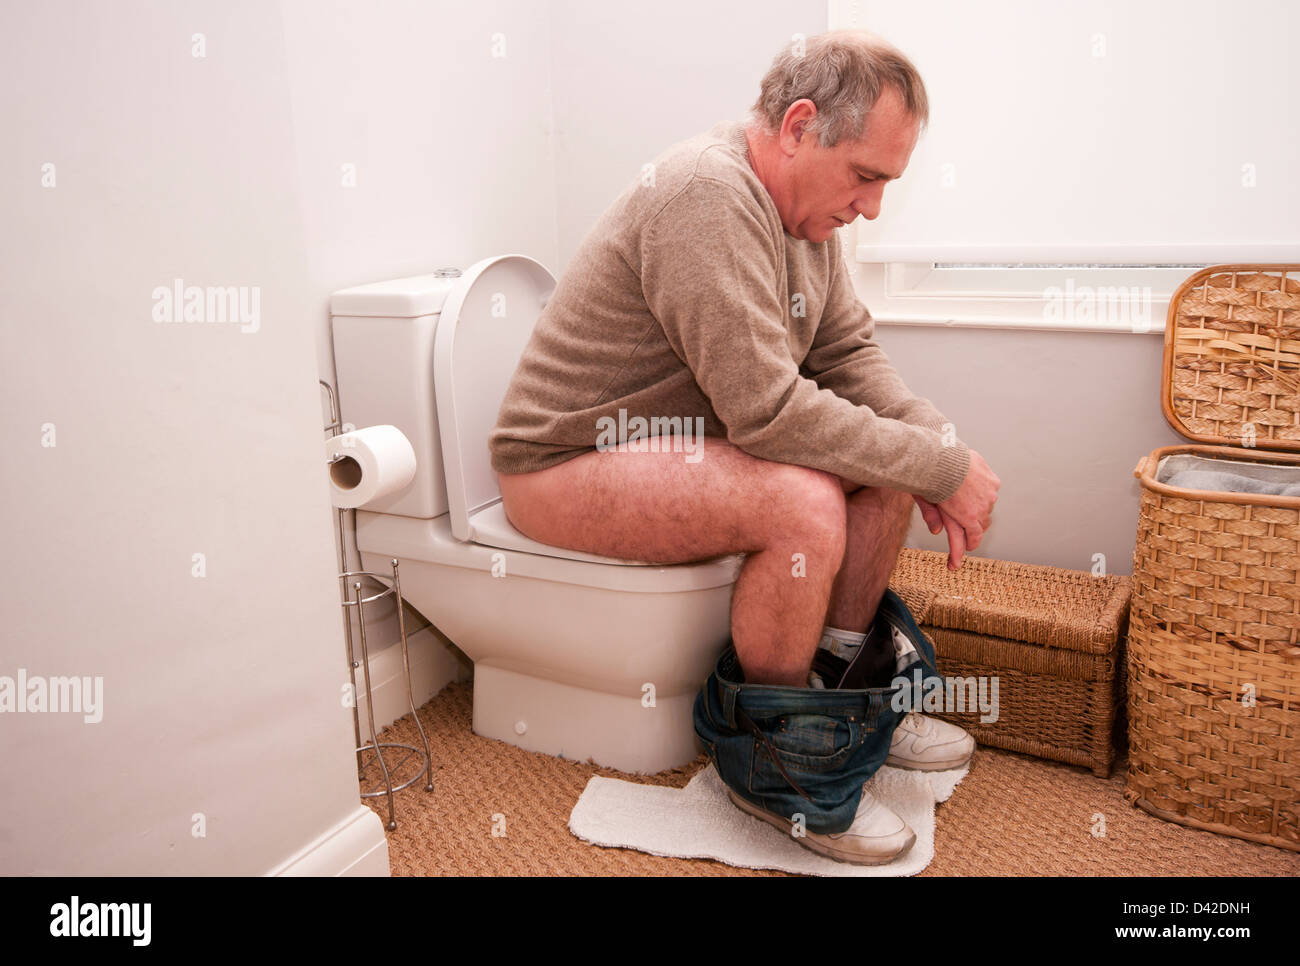 man-sitting-on-the-toilet-with-his-trousers-down-D42DNH.jpg